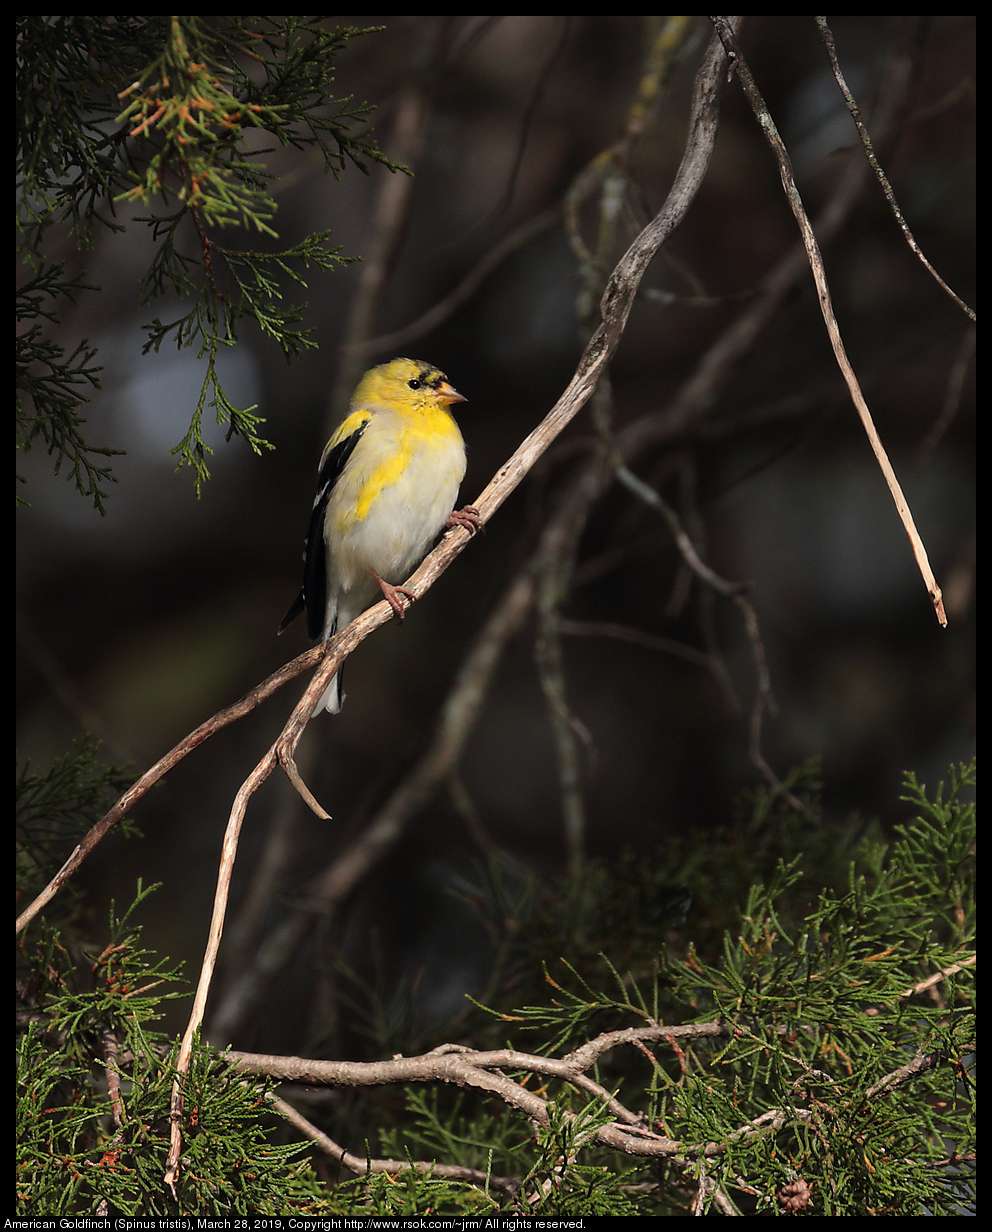 American Goldfinch (Spinus tristis), March 28, 2019